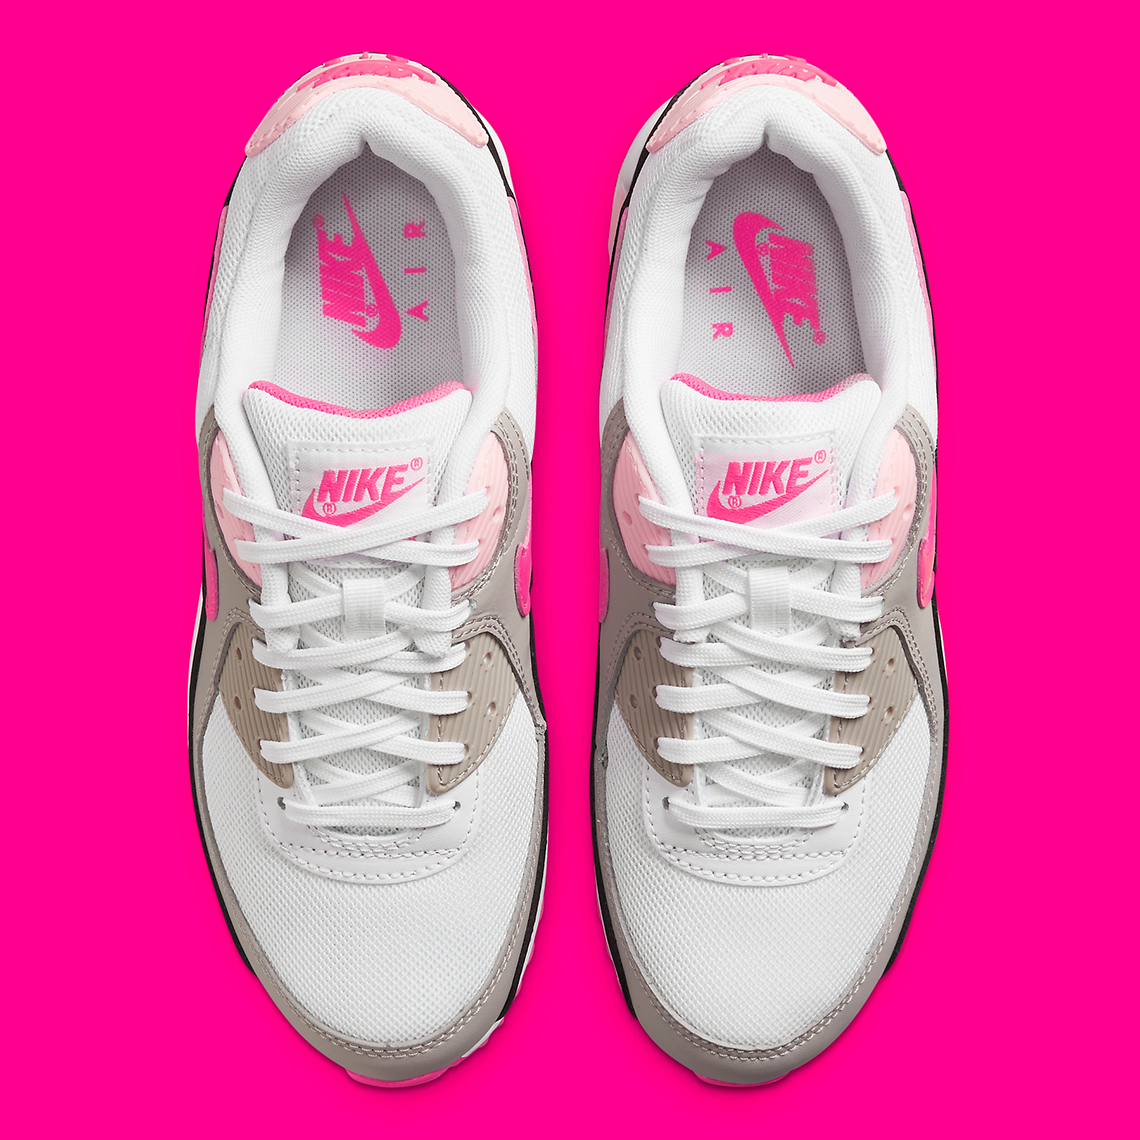 Two Shades Of Pink Appear On This OG-Style Nike Air Max 90 | LaptrinhX ...